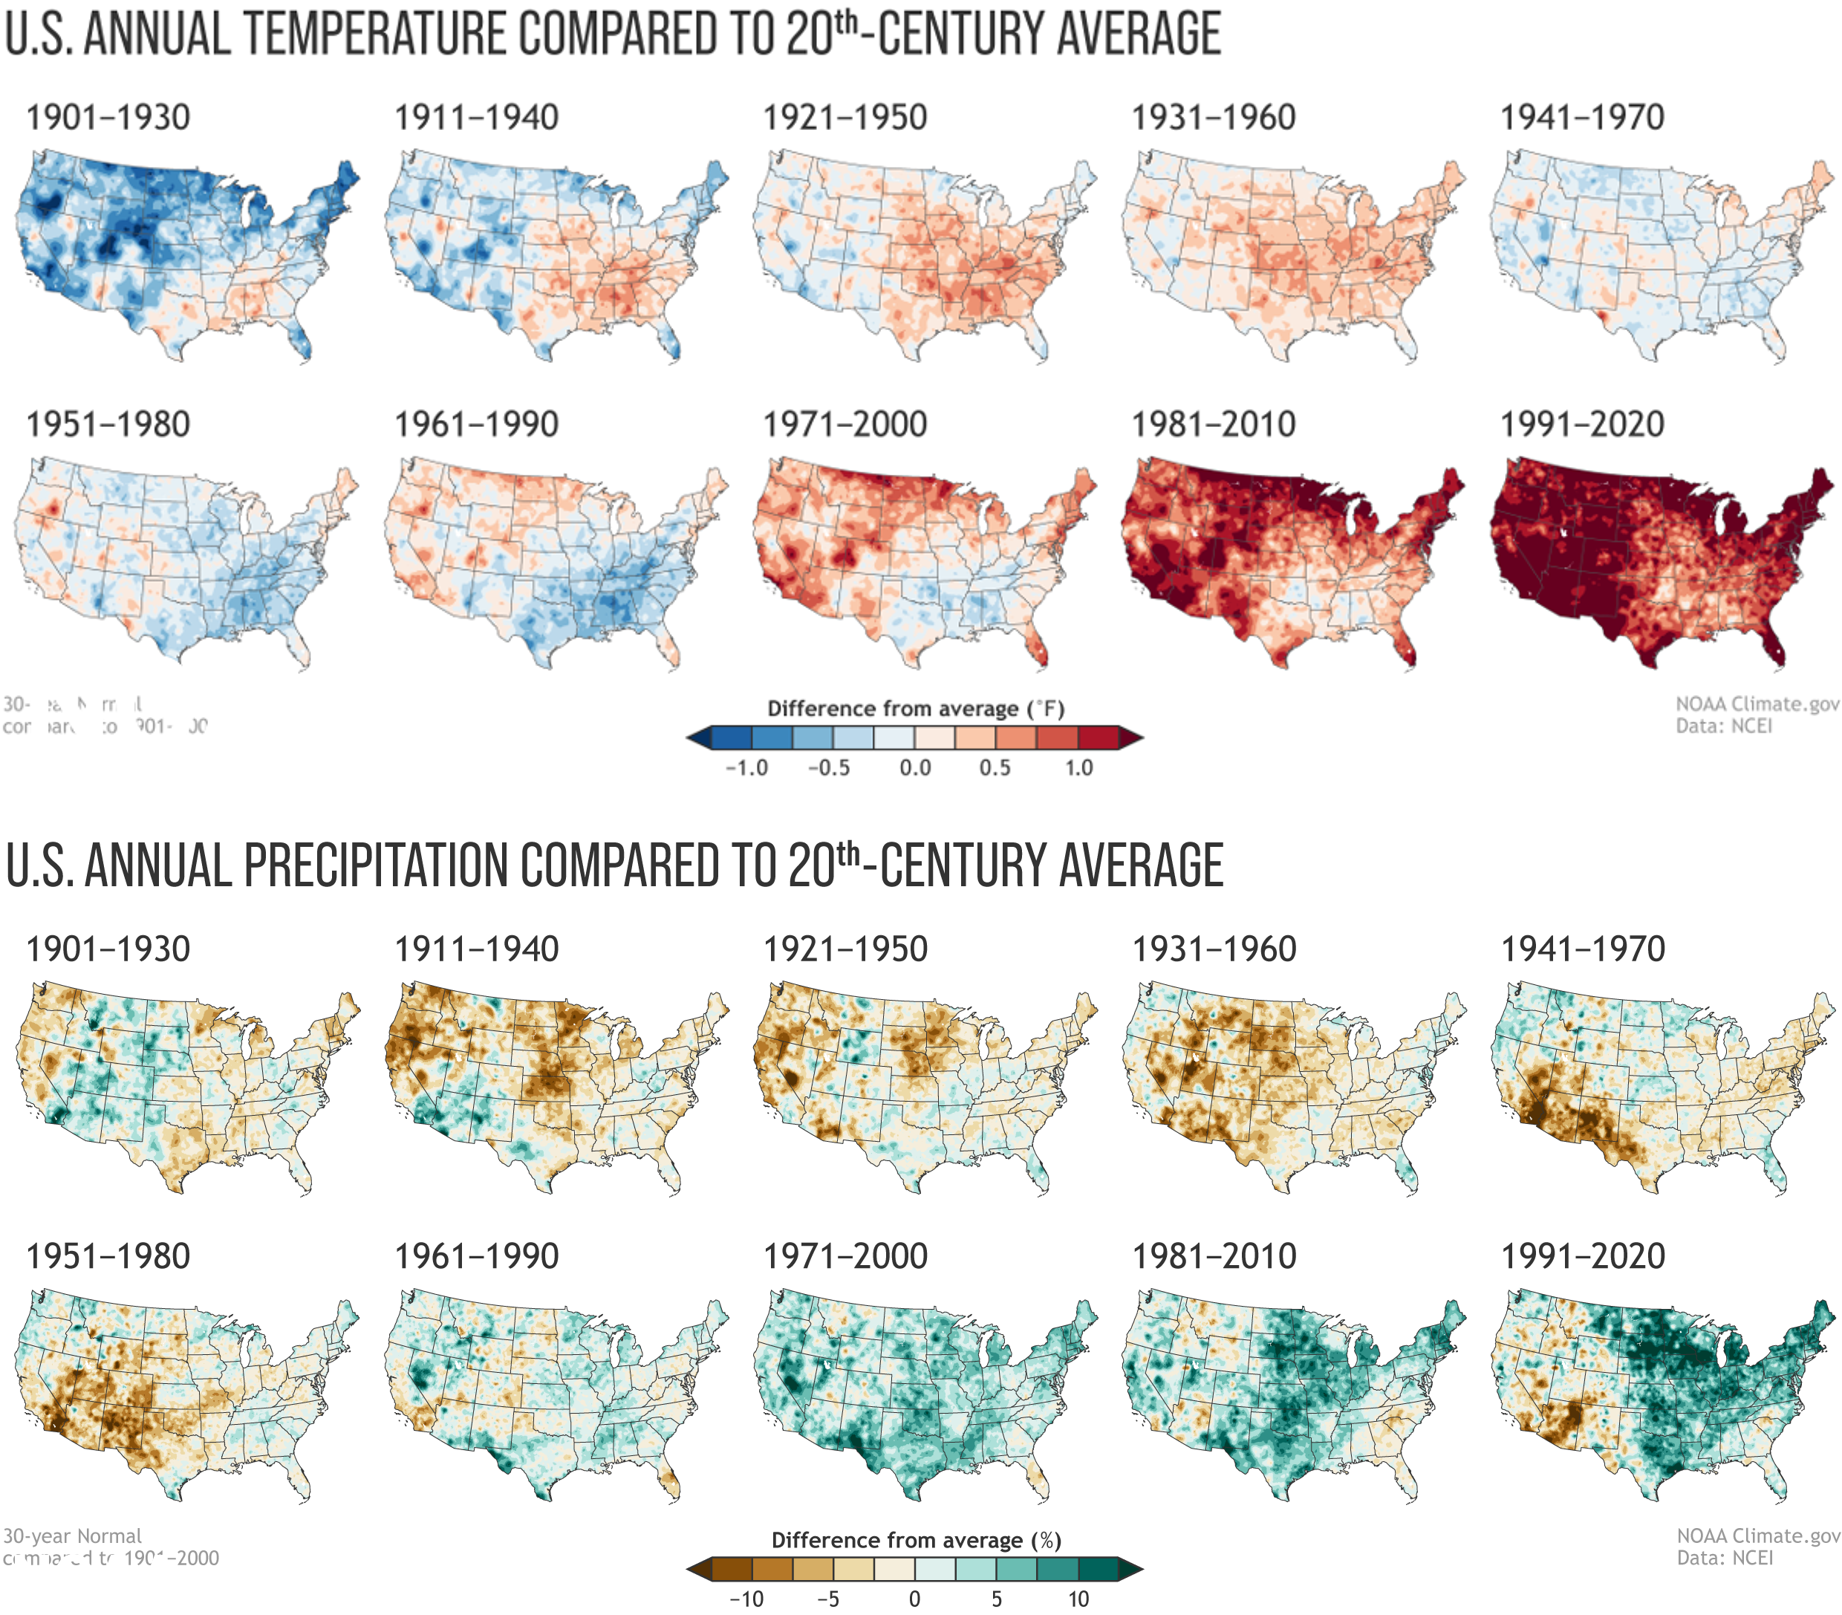 Widespread warming, higher levels of precipitation in midwest/northeast, and lower levels of precipitation in the southwest